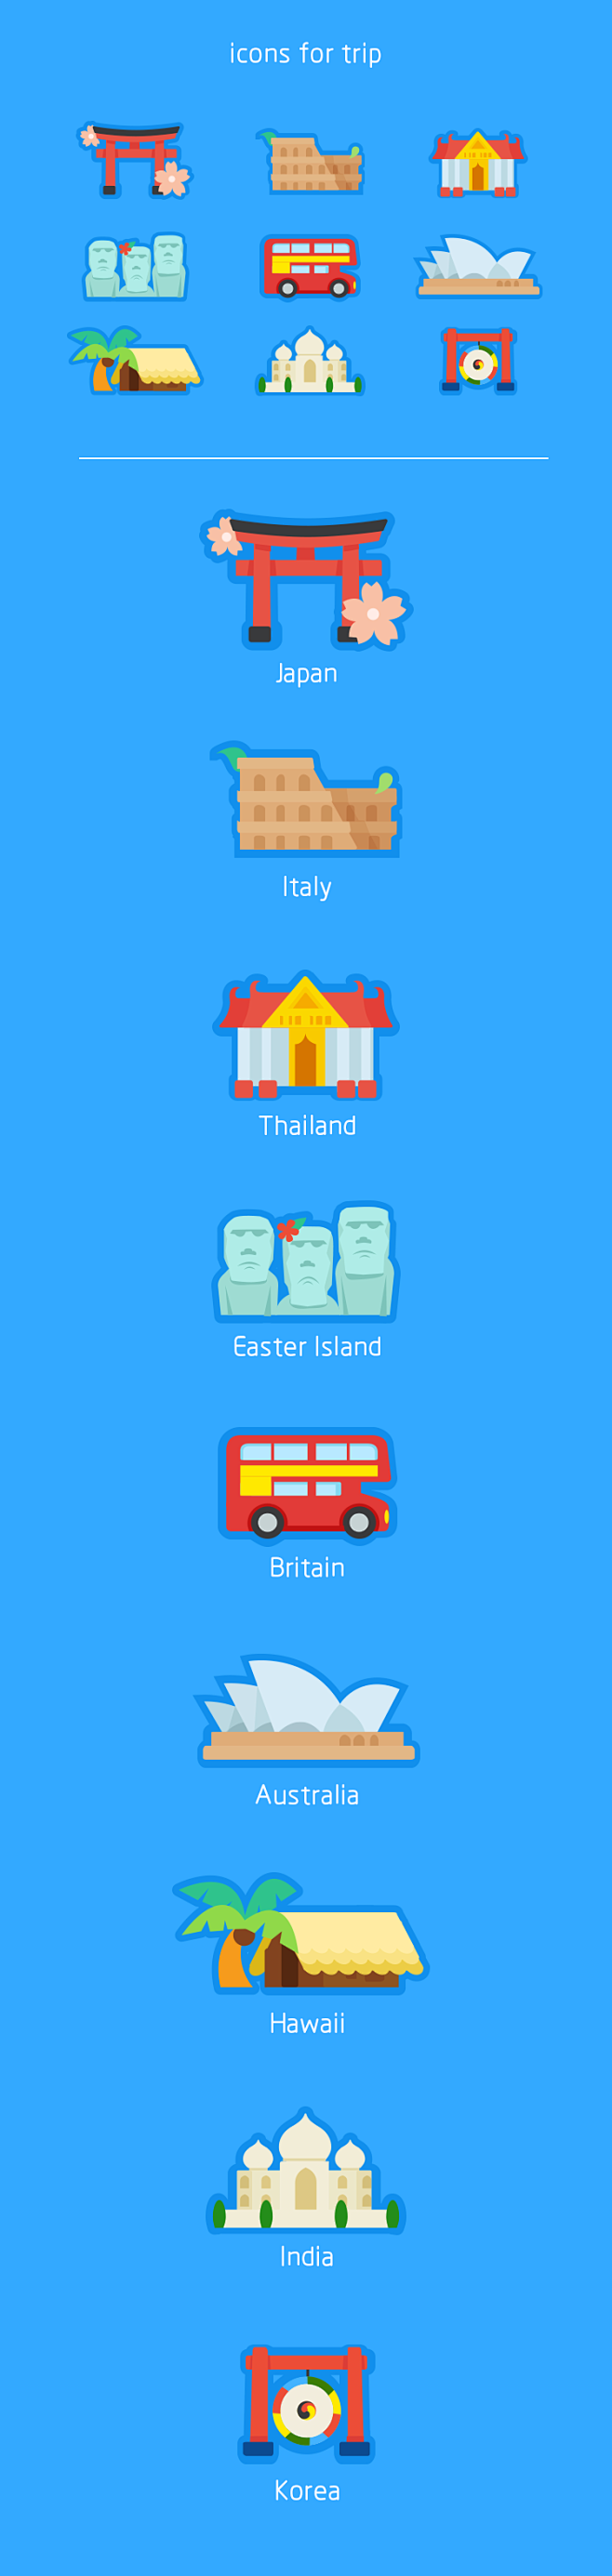 Icons for trip
by Yi...